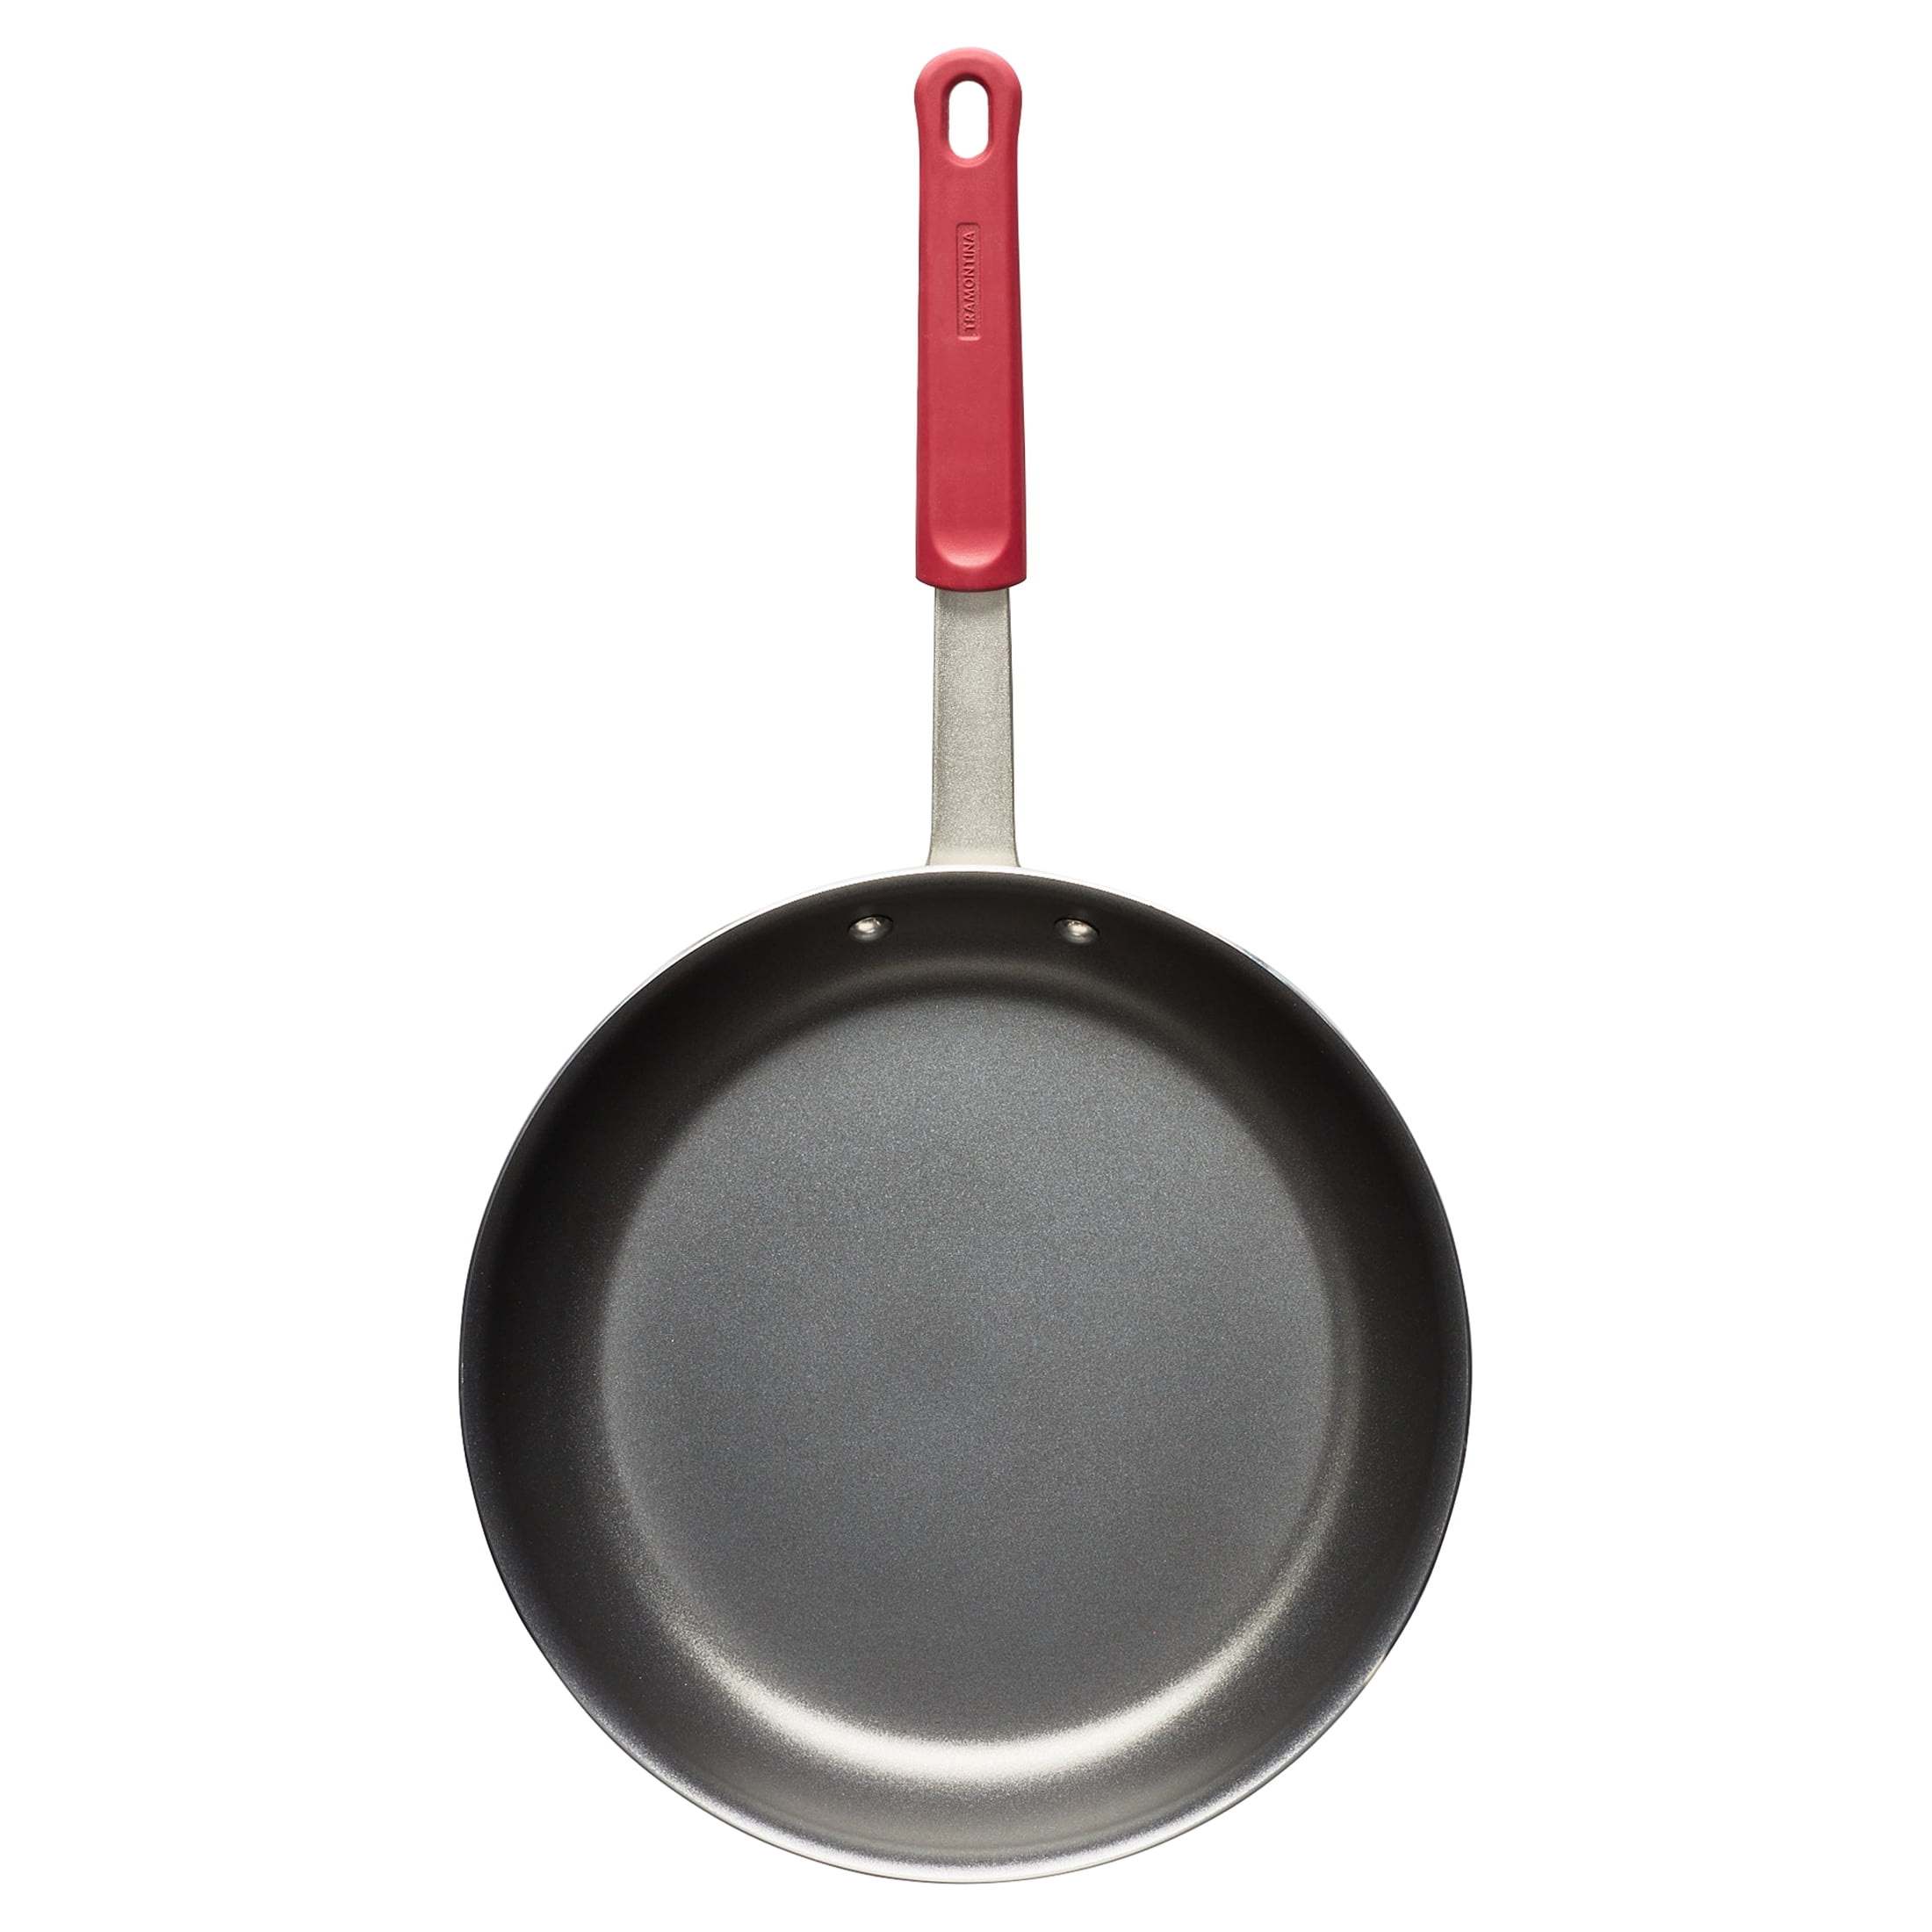 Tramontina Professional Nonstick Fry Pan Aluminum 12 inch, 80114/536DS,  Made in Brazil